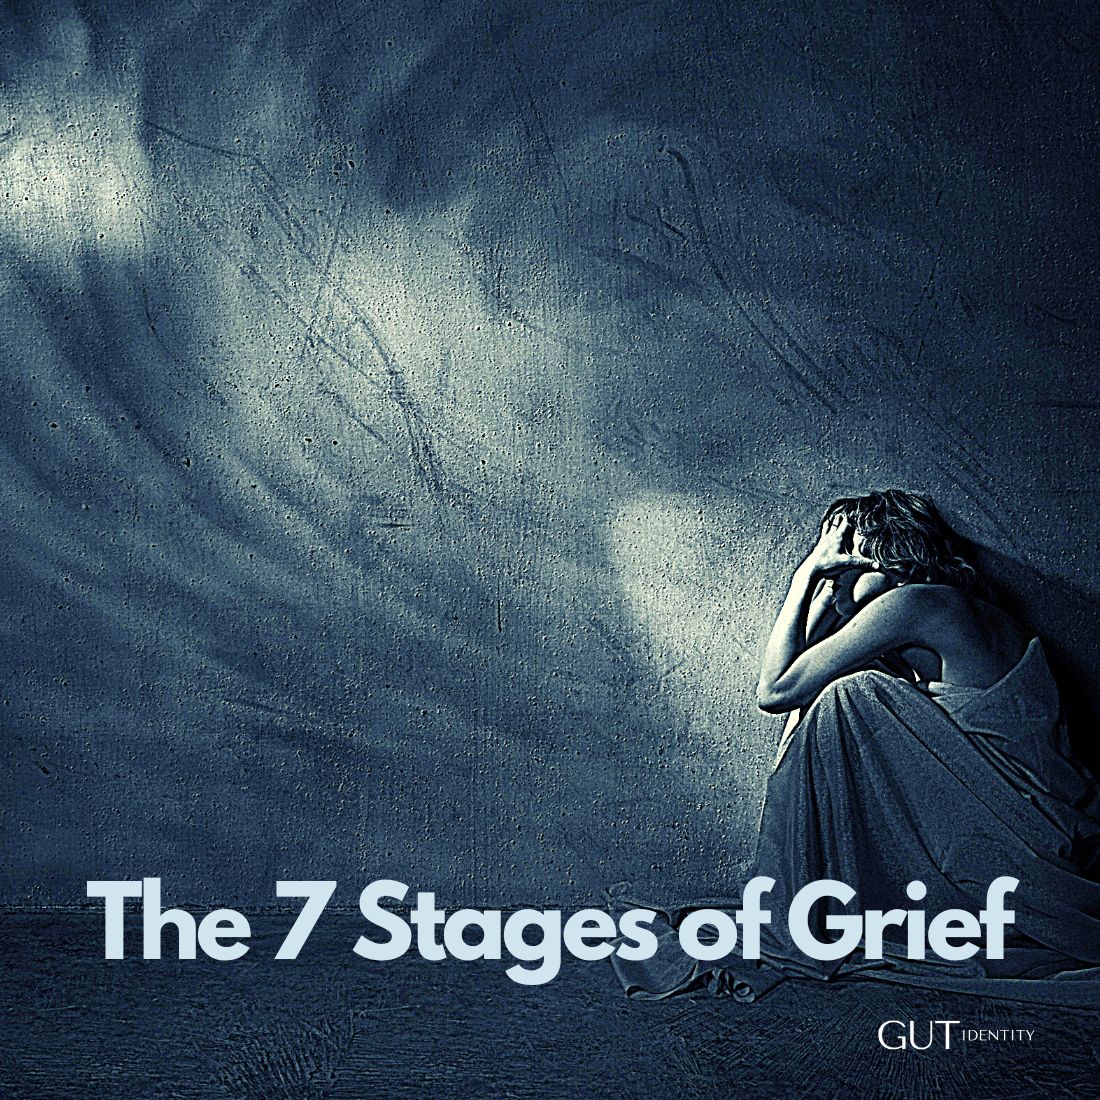 The 7 Stages of Grief by Gutidentity